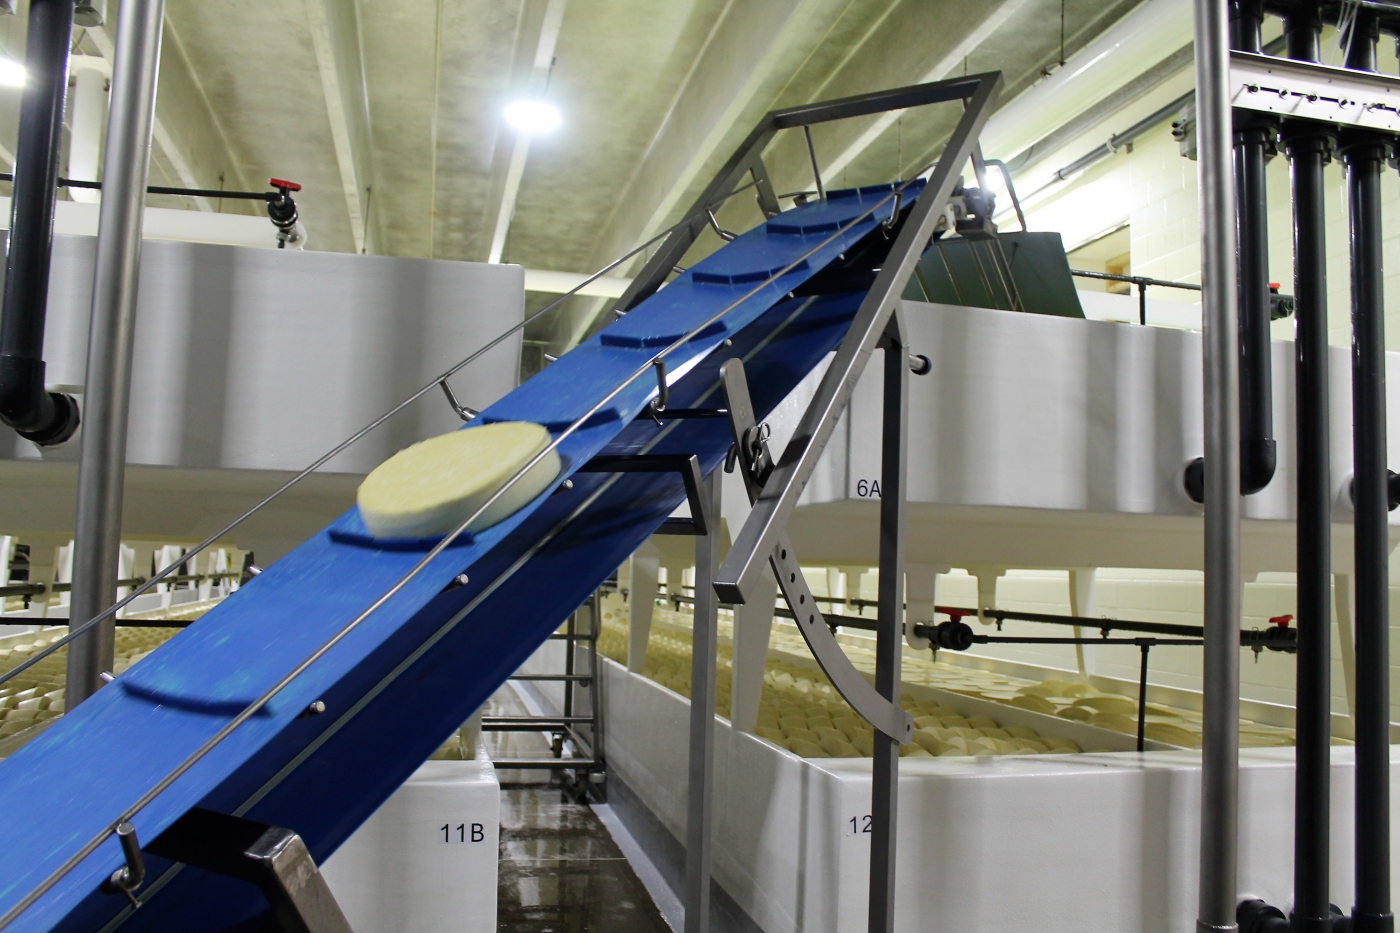 Cheese being put into brine tanks.